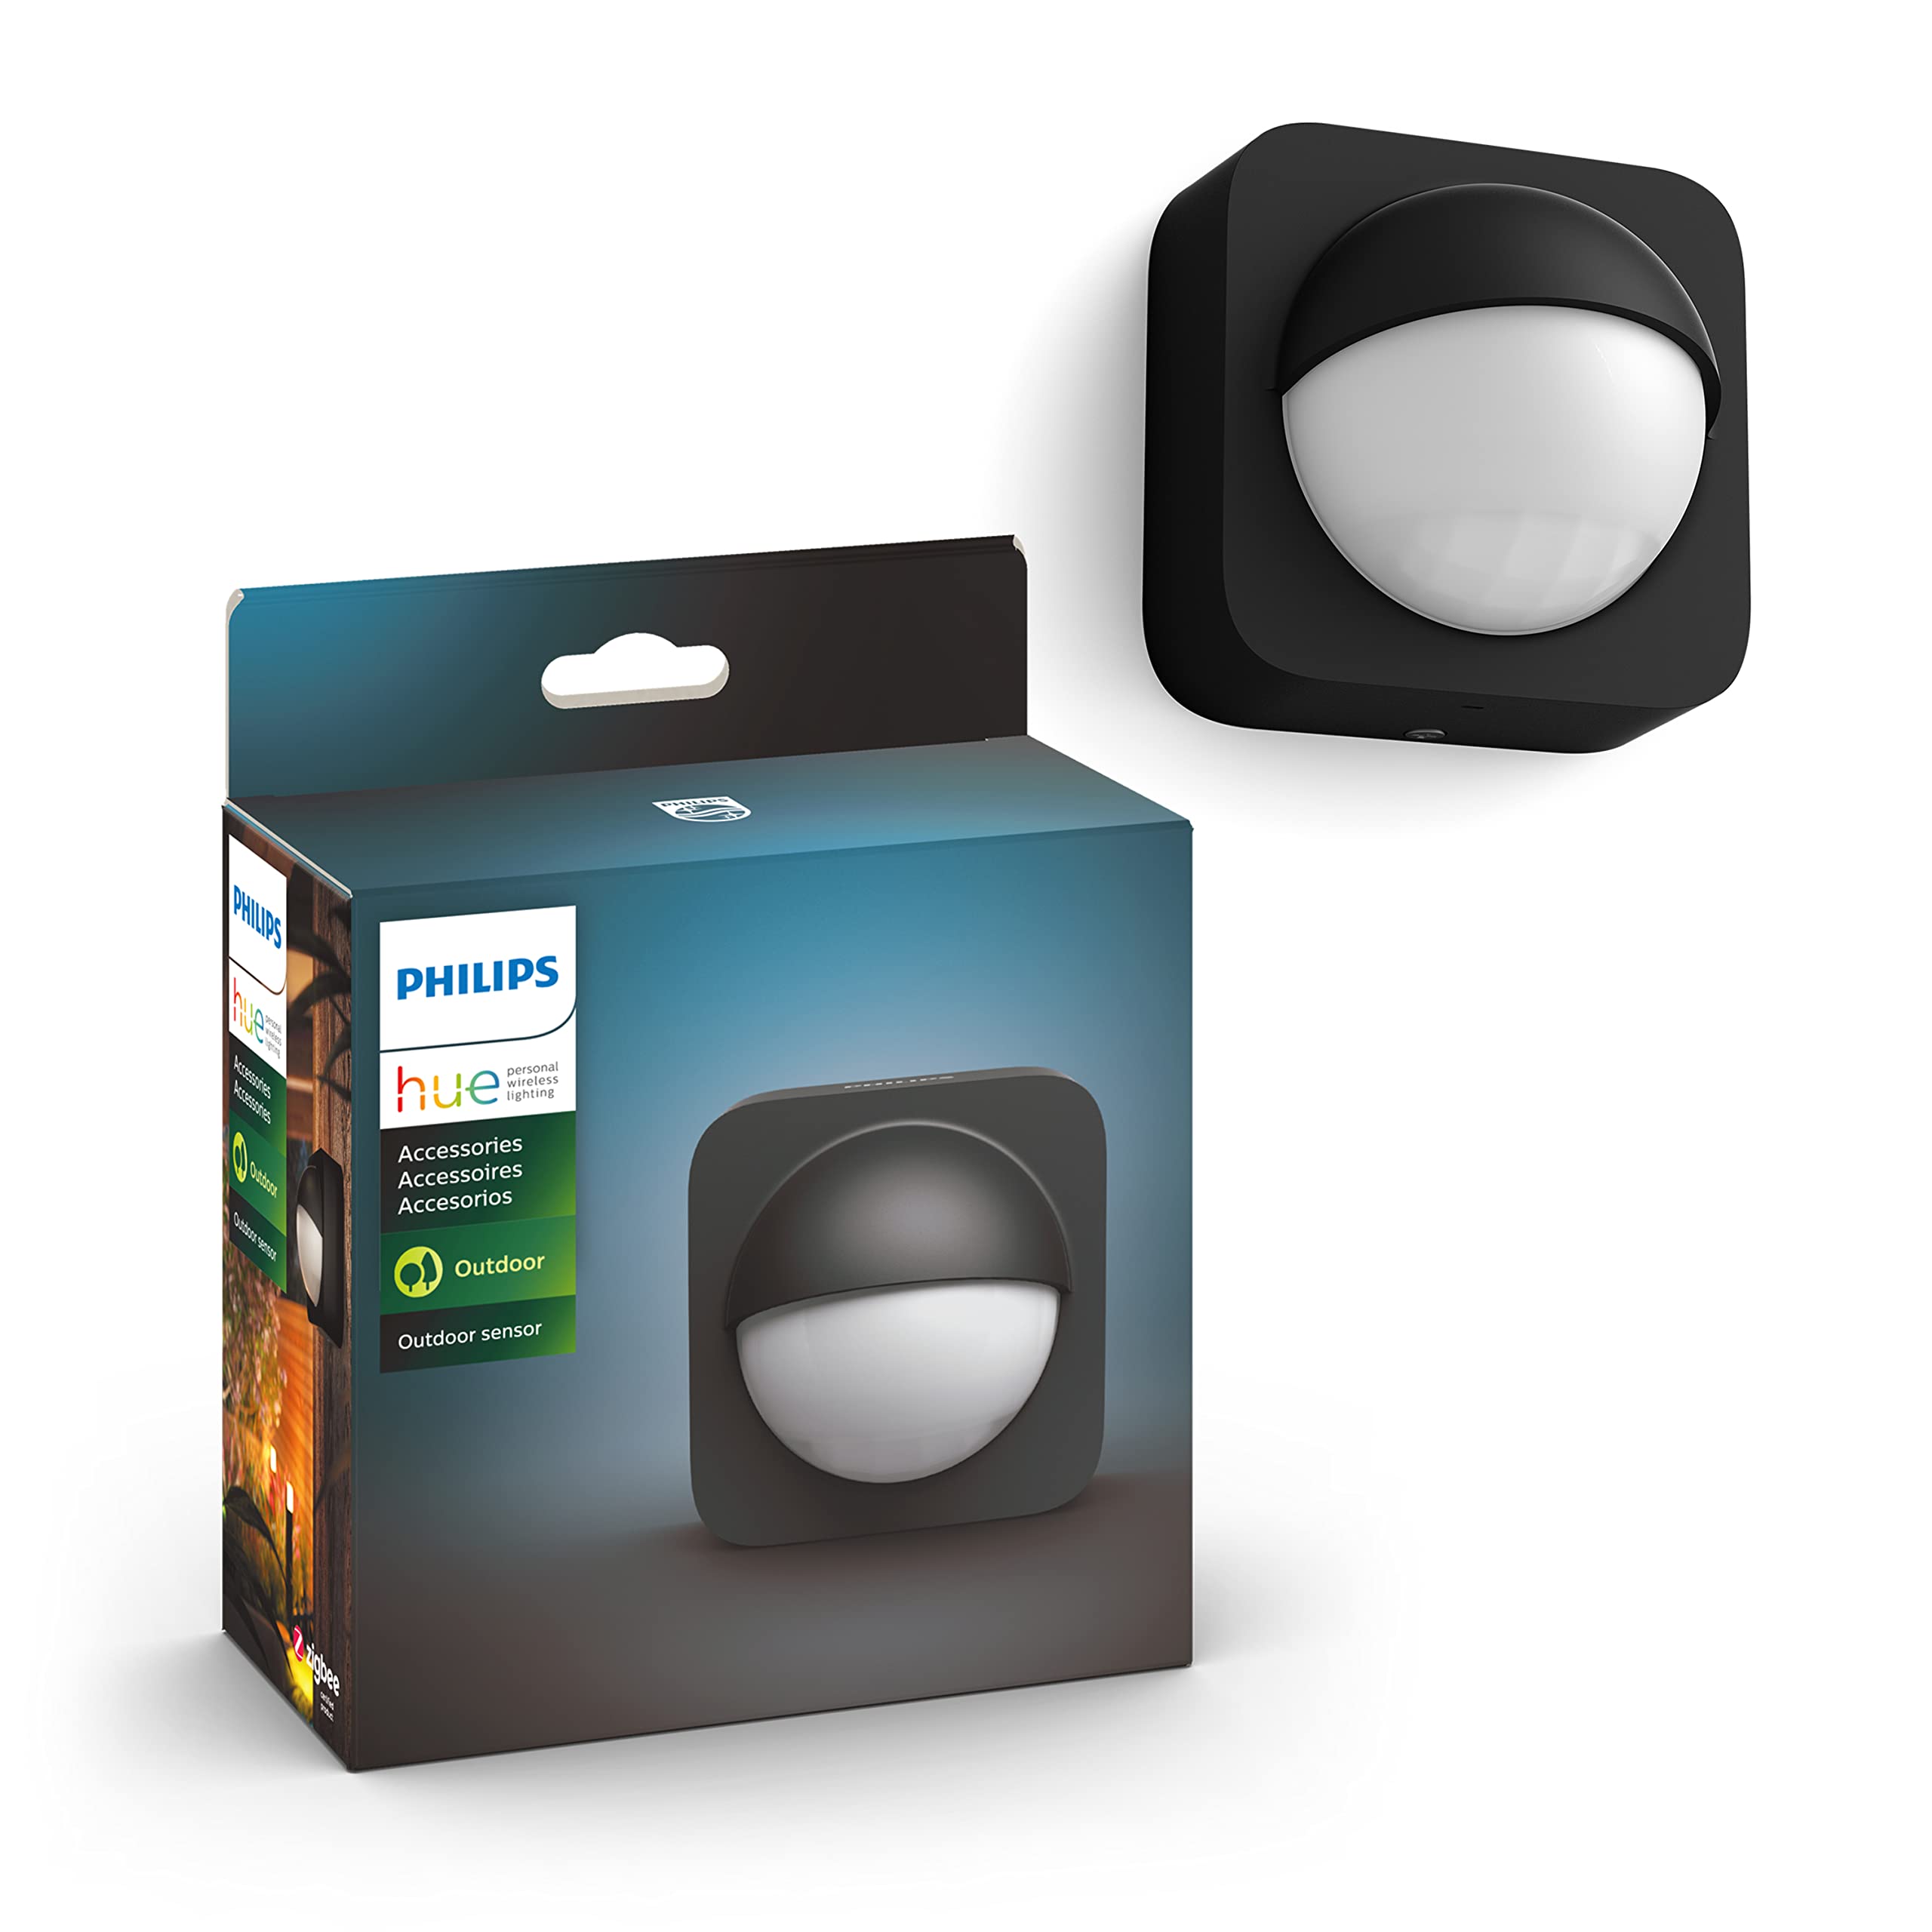 Philips Hue Outdoor Motion Sensor - 1 Pack - Turns Lights On When Motion is Detected - Weatherproof - Requires Hue Bridge - Compatible with Alexa, Apple HomeKit and Google Assistant